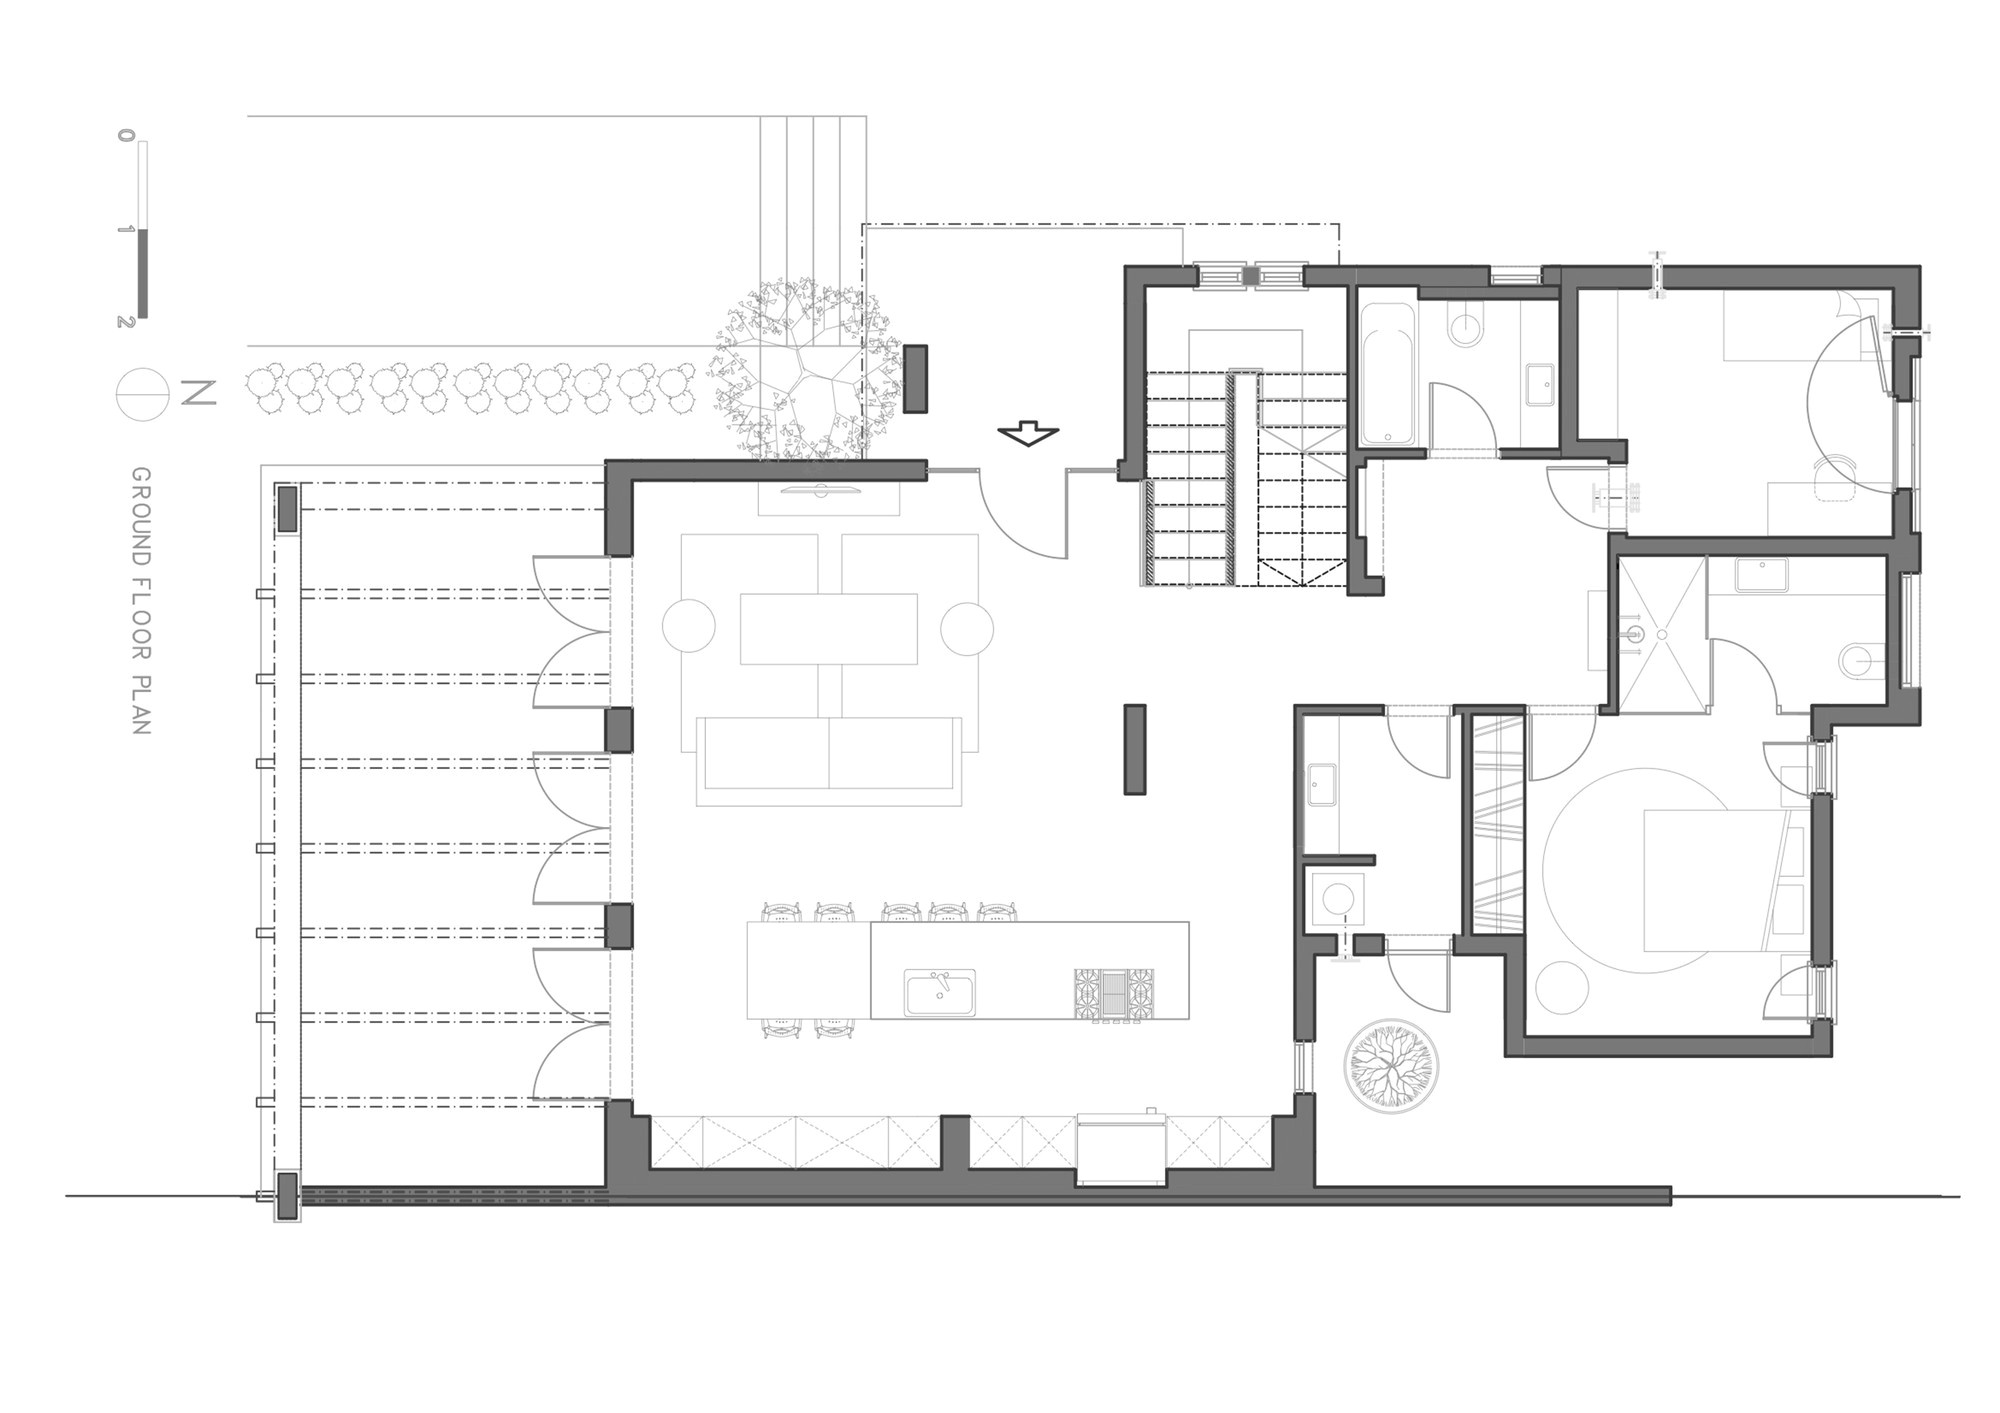 Architectural Design Home Floor Plan Architectural Plans Of Residential Houses Office Clipgoo